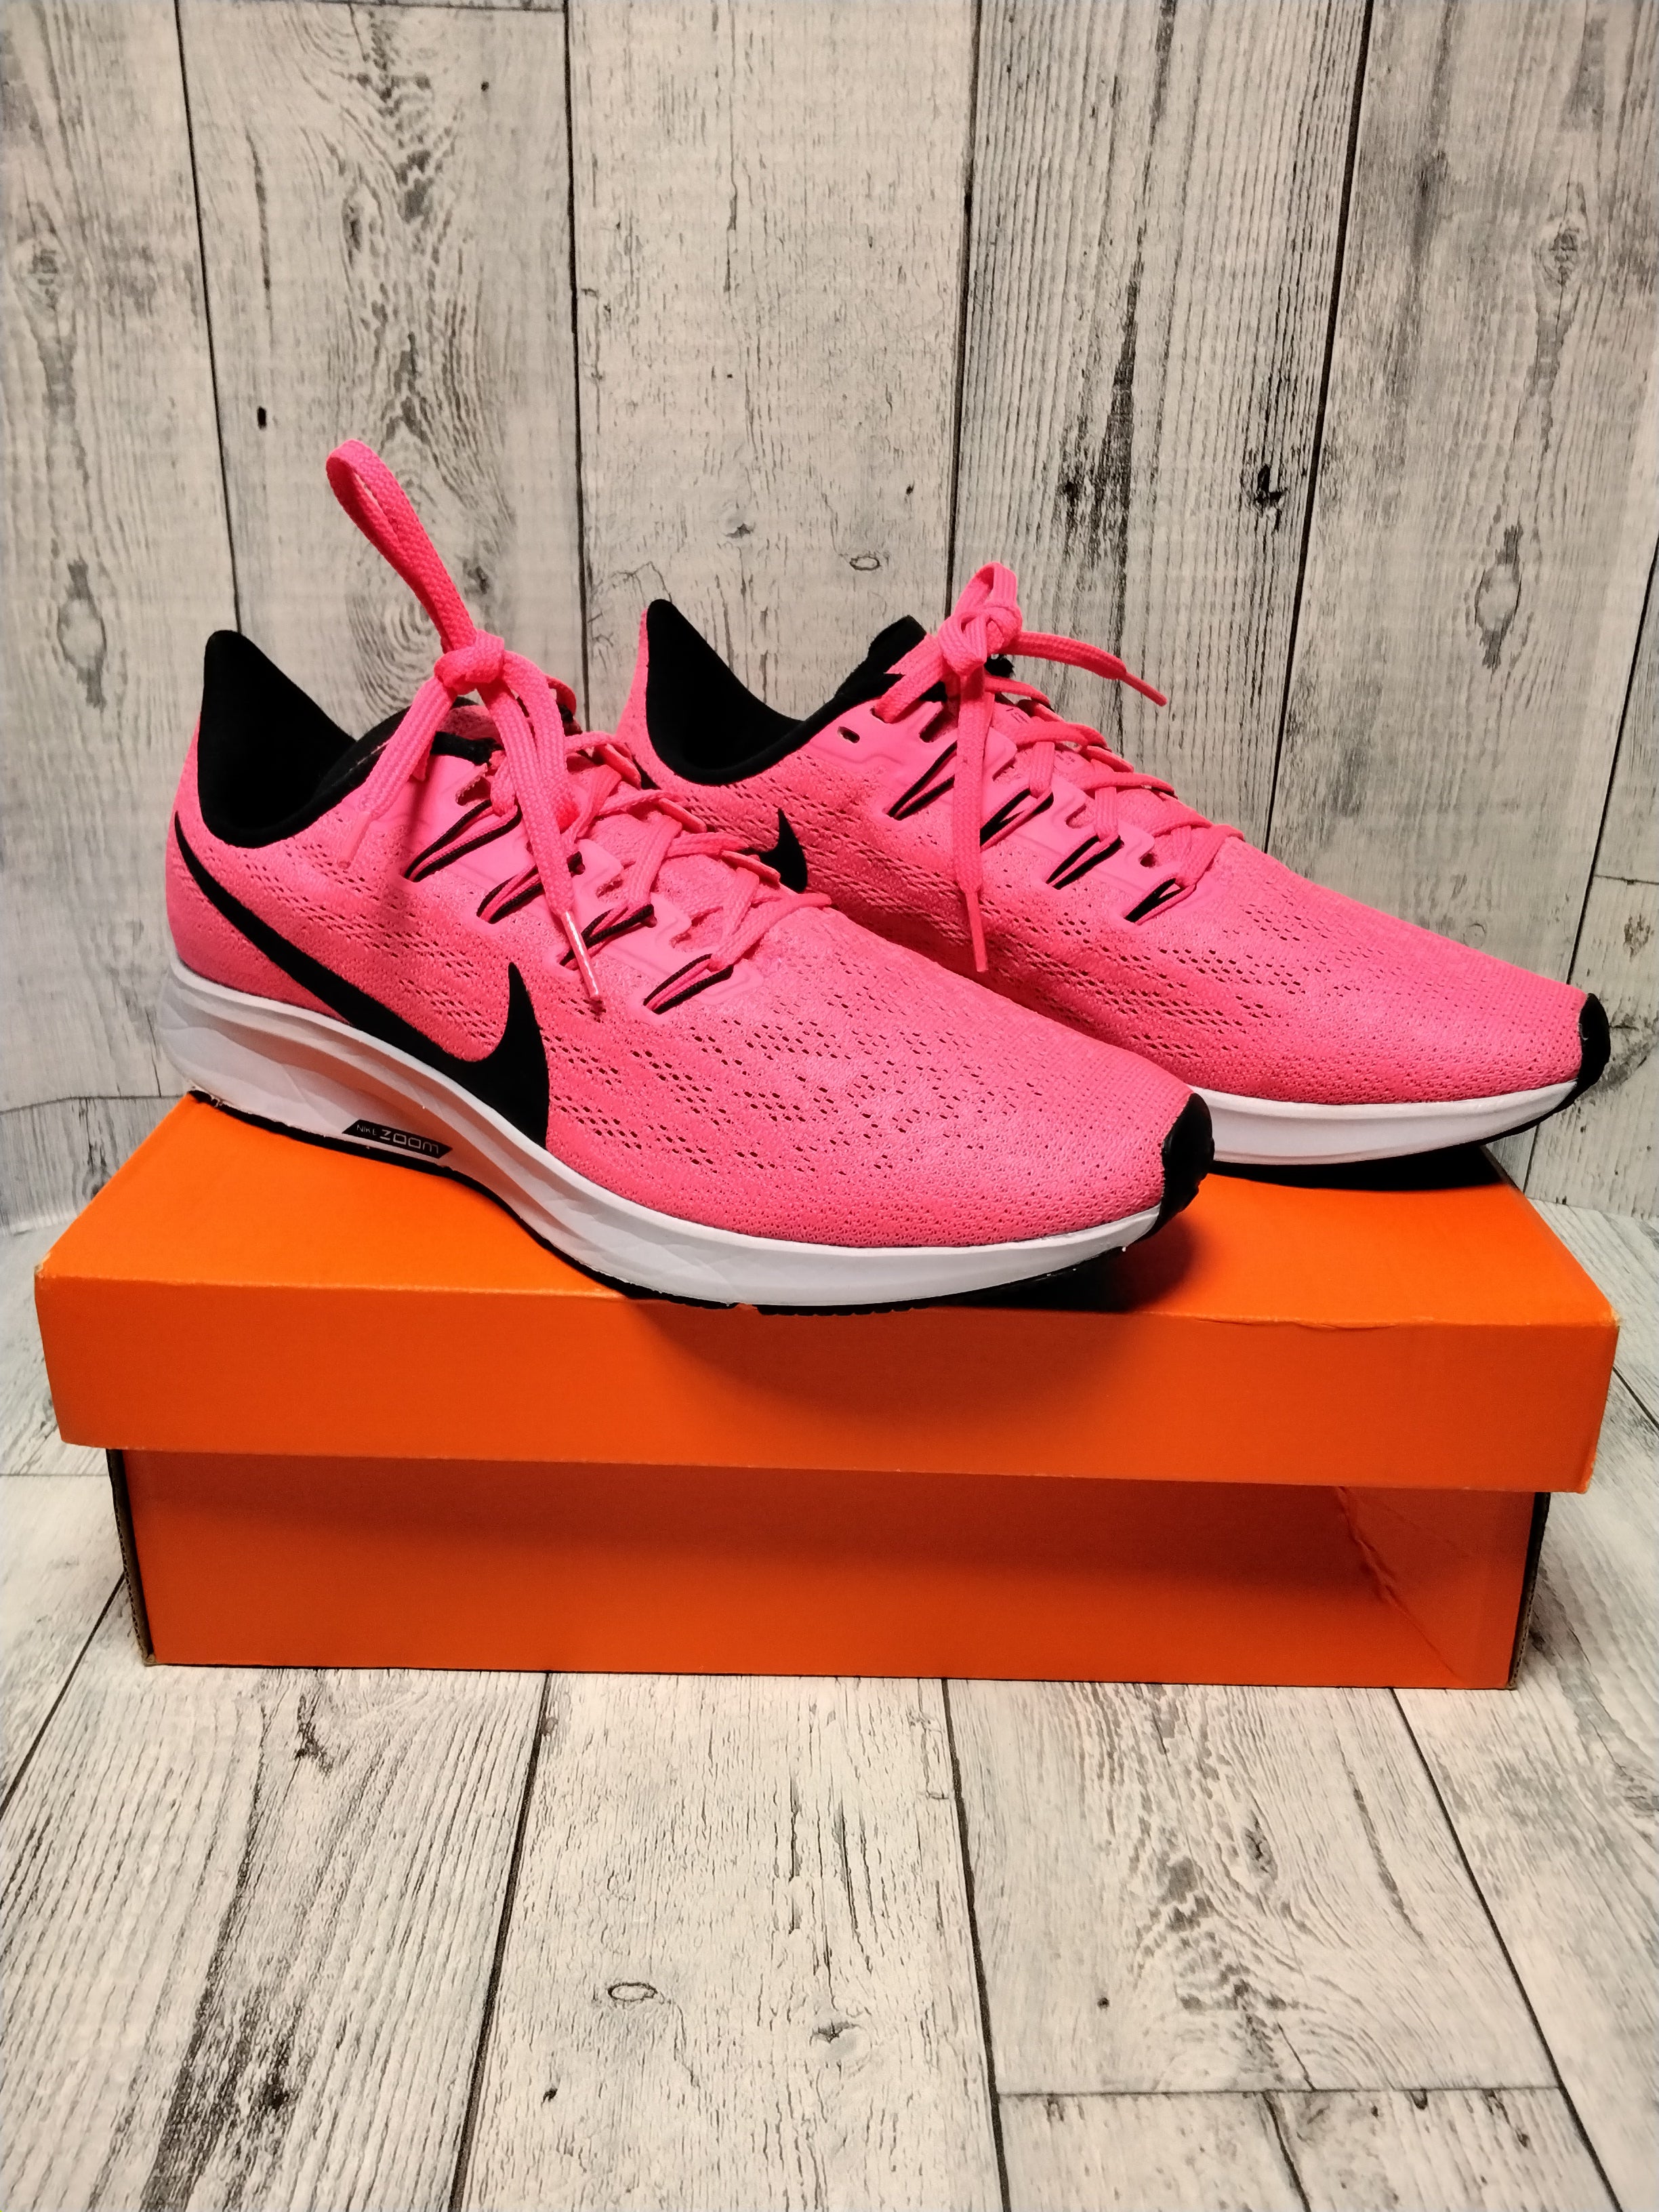 Nike Women's Air Zoom Pegasus 36 Running Shoes, Size 9.5 *LIGHTY USED* (7783297646830)